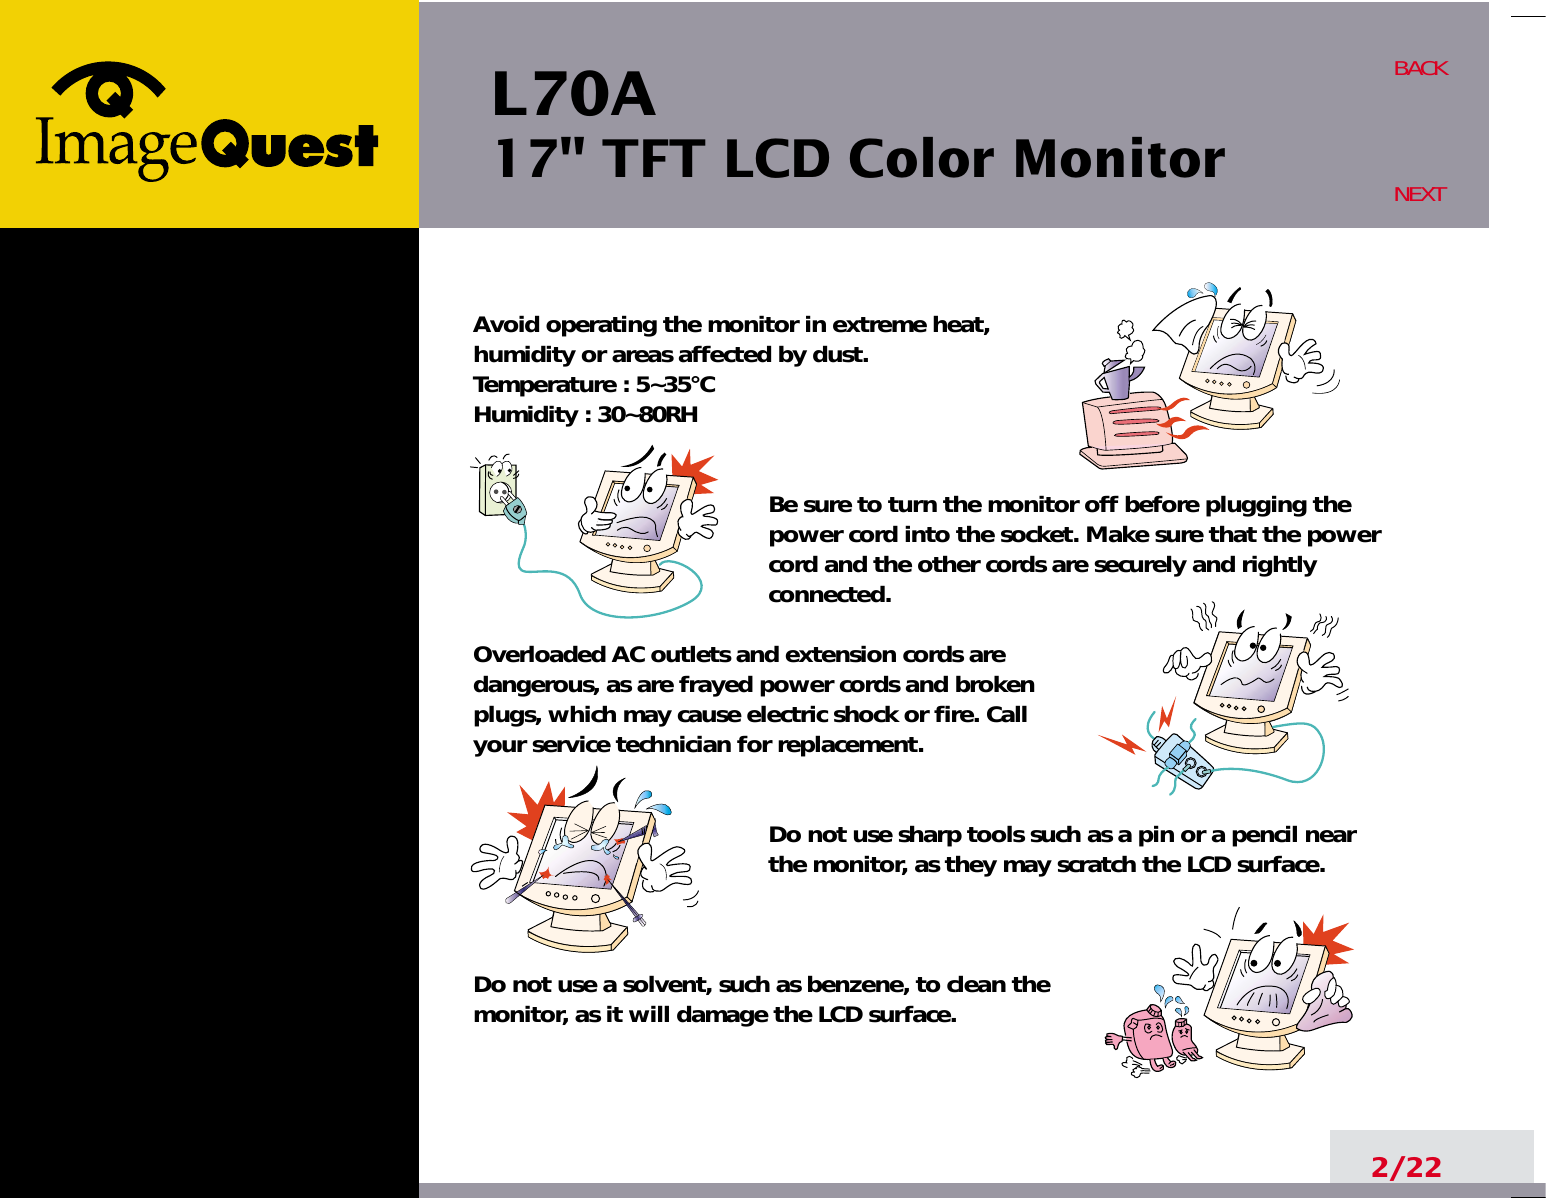 L70A17&quot; TFT LCD Color Monitor2/22BACKNEXTAvoid operating the monitor in extreme heat, humidity or areas affected by dust. Temperature : 5~35°CHumidity : 30~80RH Be sure to turn the monitor off before plugging thepower cord into the socket. Make sure that the powercord and the other cords are securely and rightlyconnected.Overloaded AC outlets and extension cords are dangerous, as are frayed power cords and broken plugs, which may cause electric shock or fire. Call your service technician for replacement.Do not use sharp tools such as a pin or a pencil near the monitor, as they may scratch the LCD surface.Do not use a solvent, such as benzene, to clean the monitor, as it will damage the LCD surface.